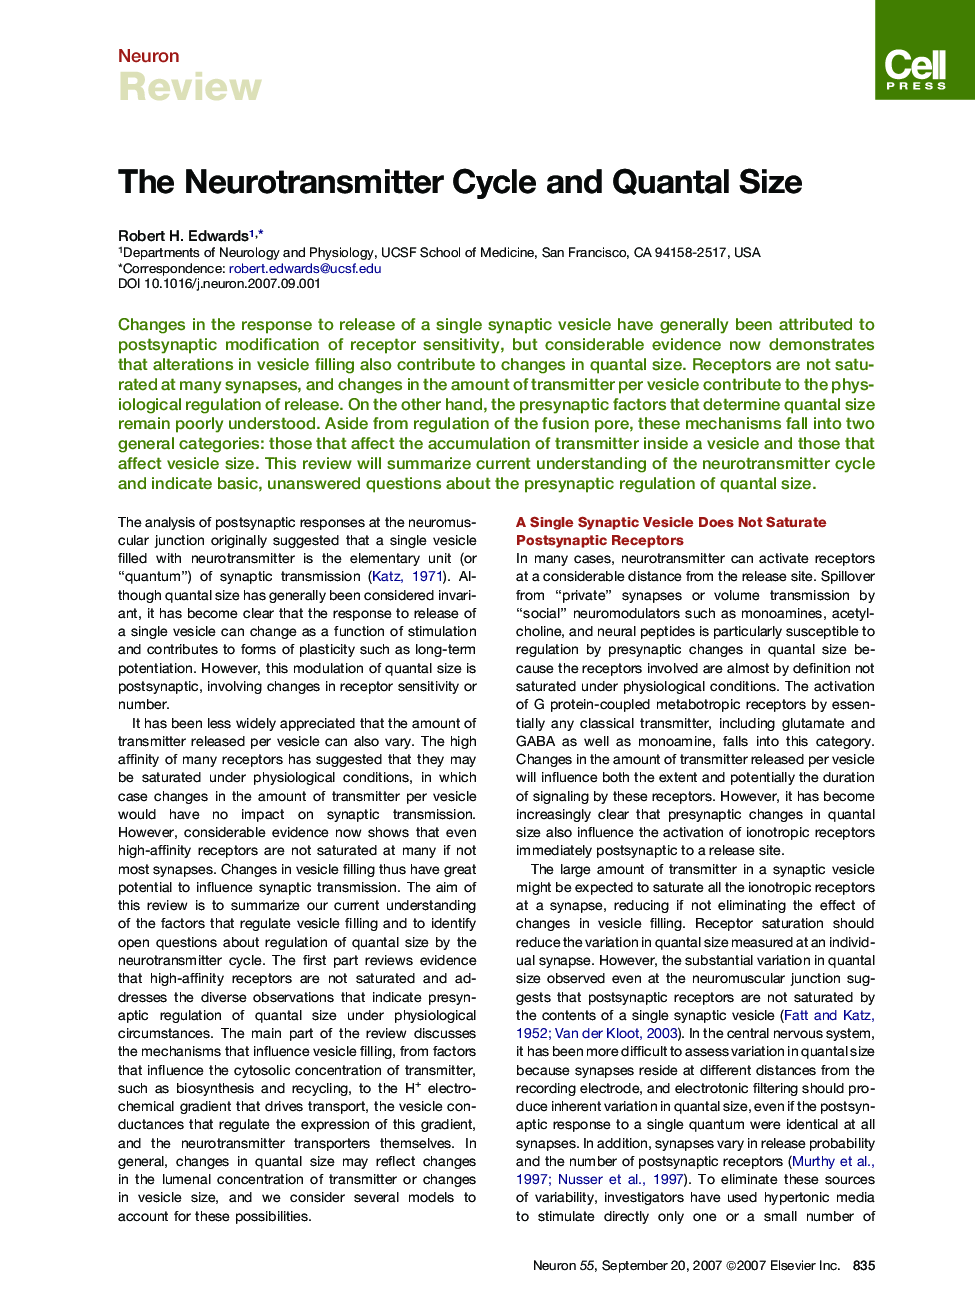 The Neurotransmitter Cycle and Quantal Size